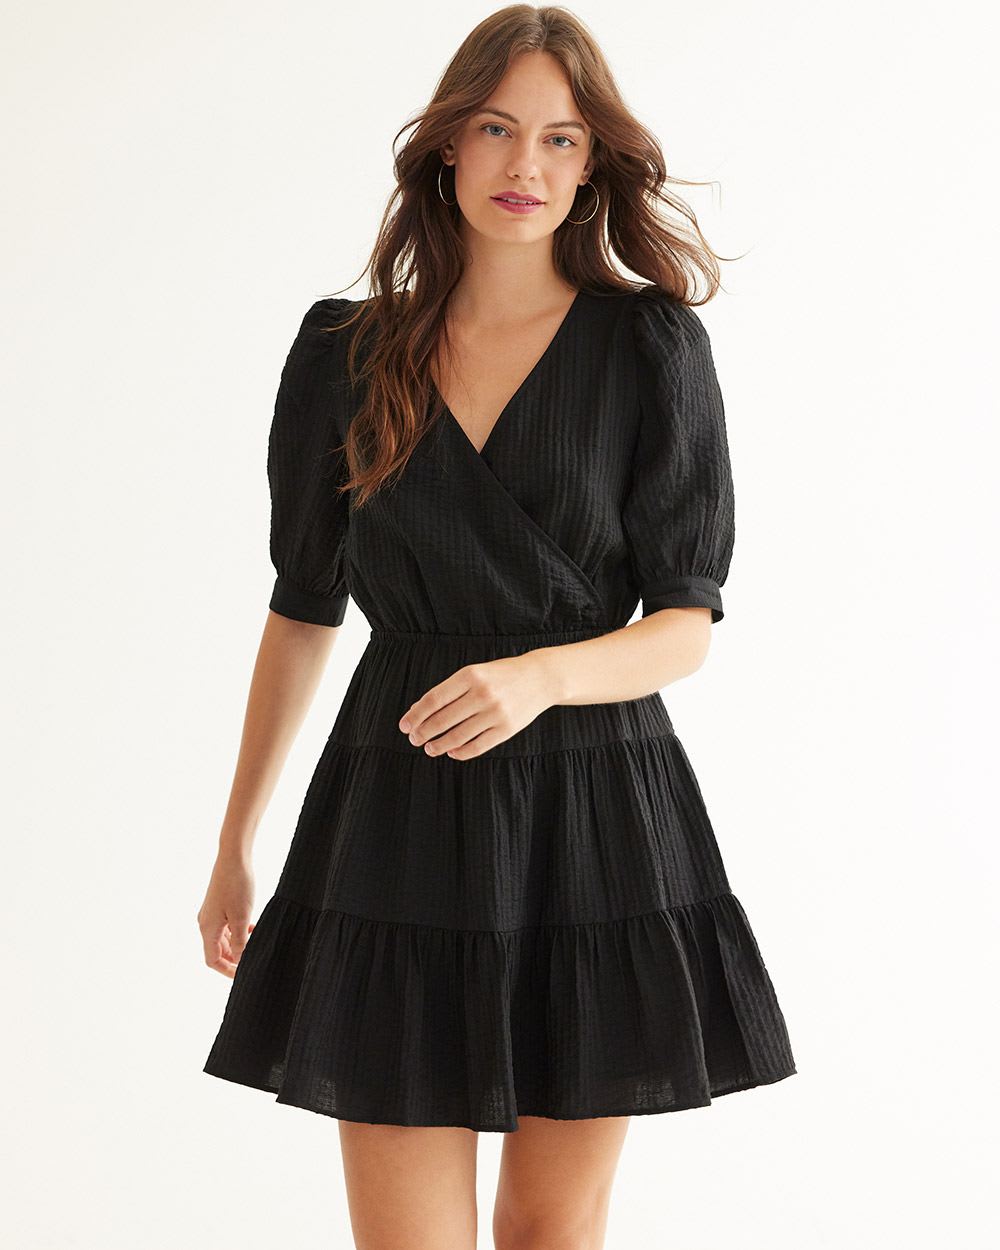 Short-Sleeve Wrap Dress with Lace-Up Details